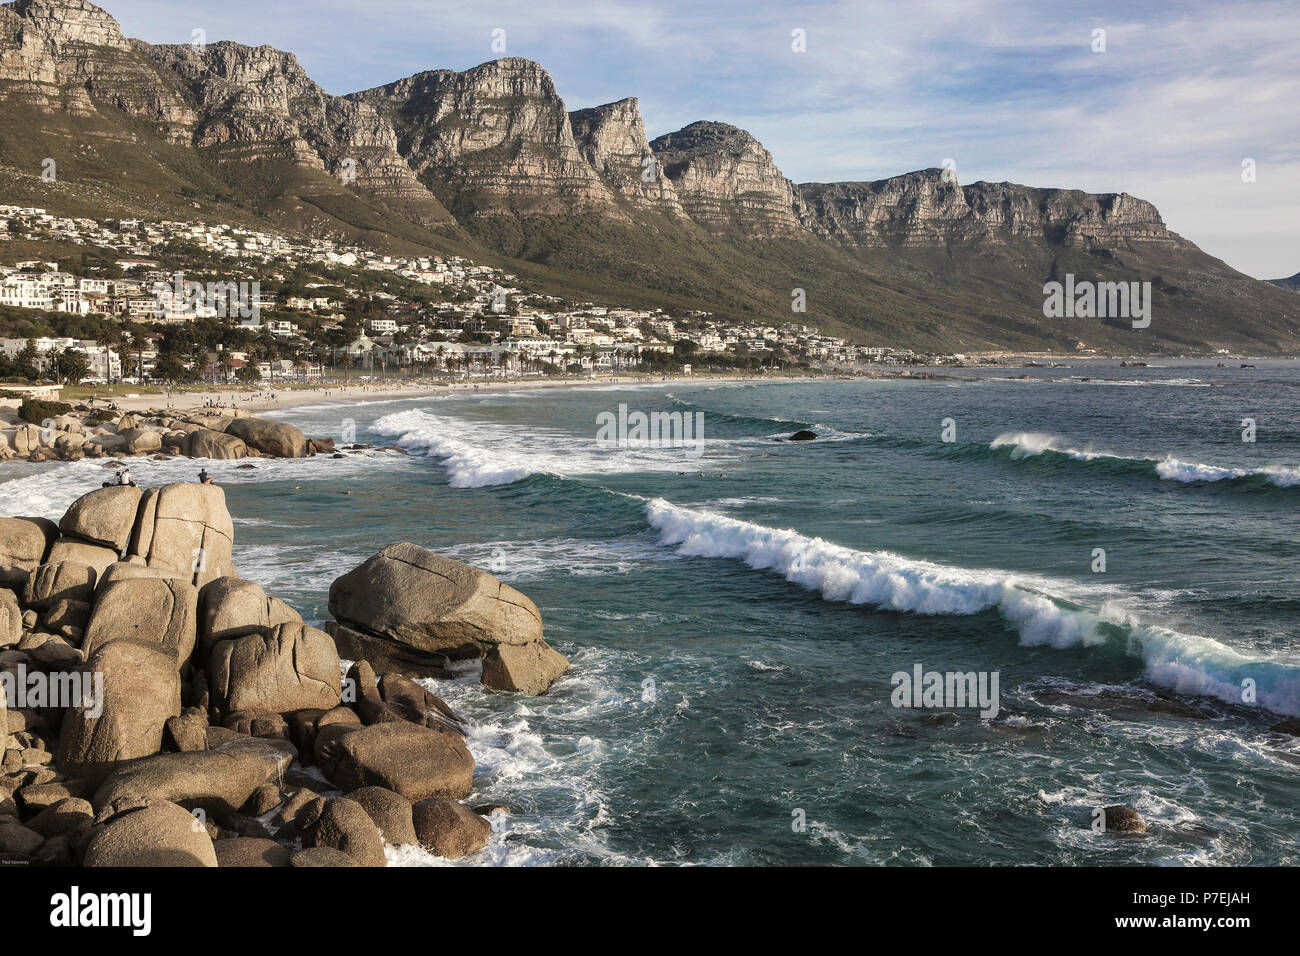 People enjoy a warm winters day at Camps Bay, Cape Town, South Africa Stock Photo